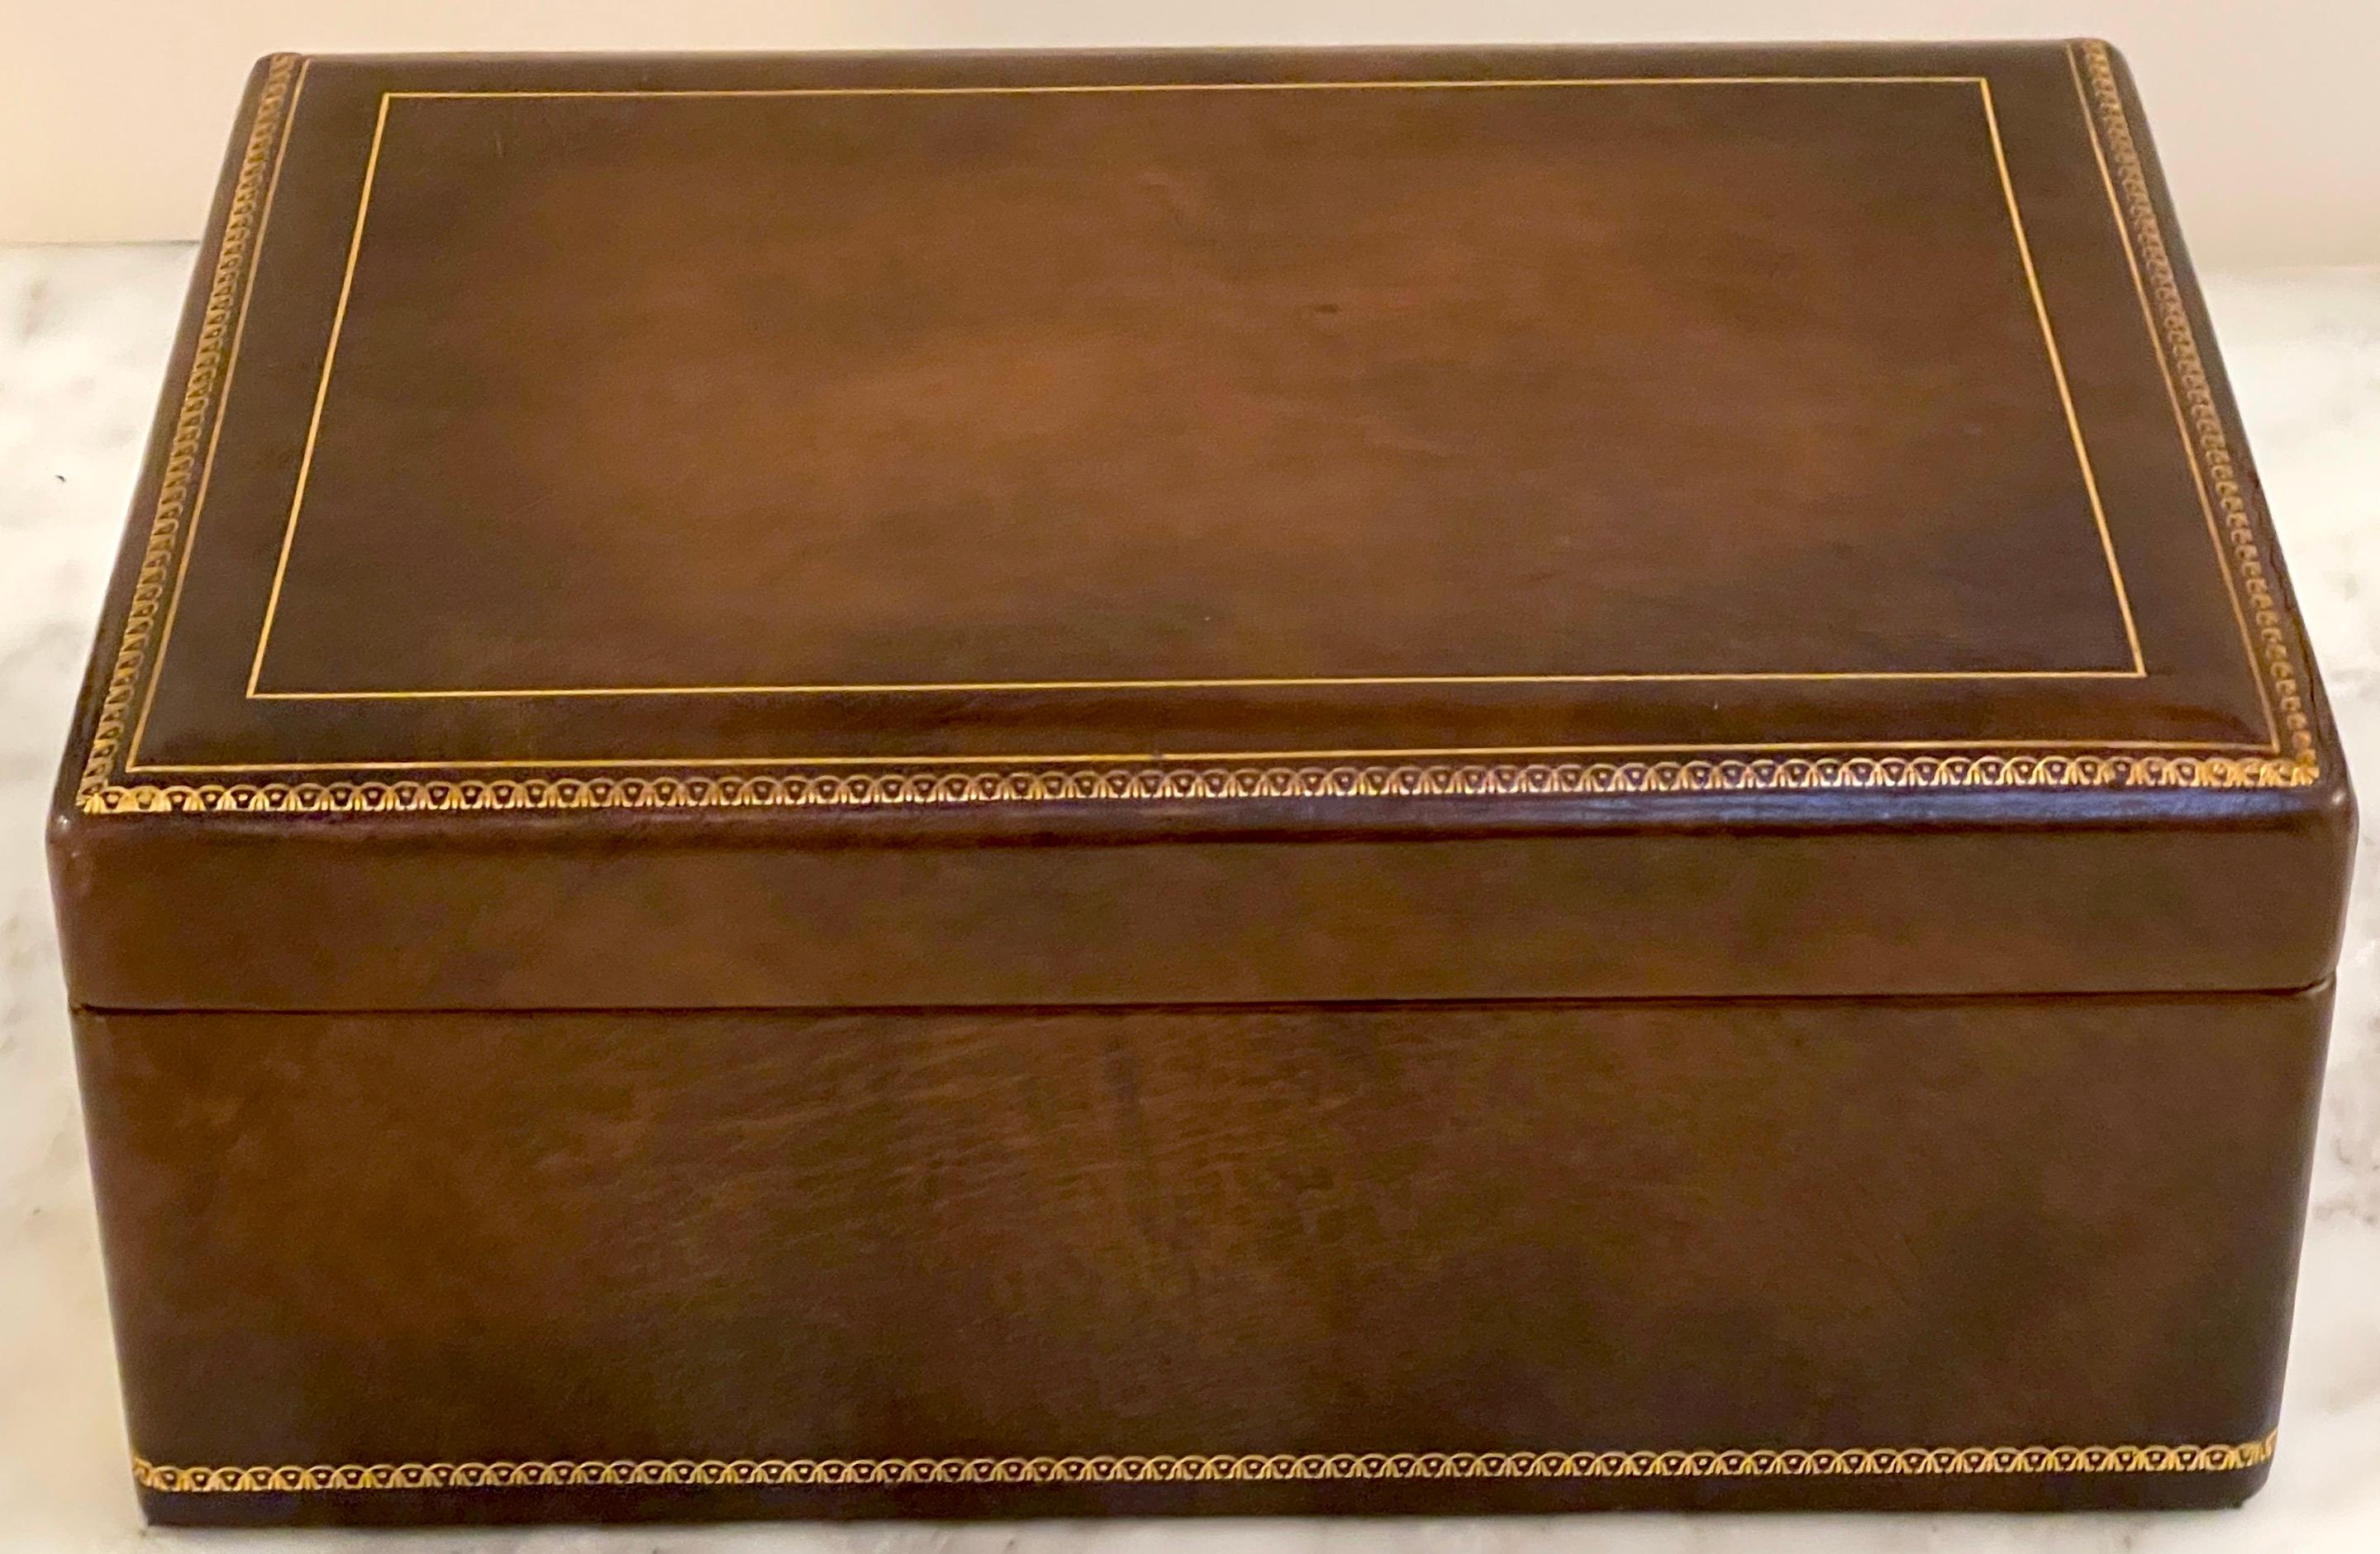 Italian midcentury Brown Leather Neoclassical Humidor with Gilt Tooling 
Italy, circa 1960s

This Italian midcentury brown leather humidor is a sophisticated and functional piece crafted with understated elegance. The rectangular box is made of